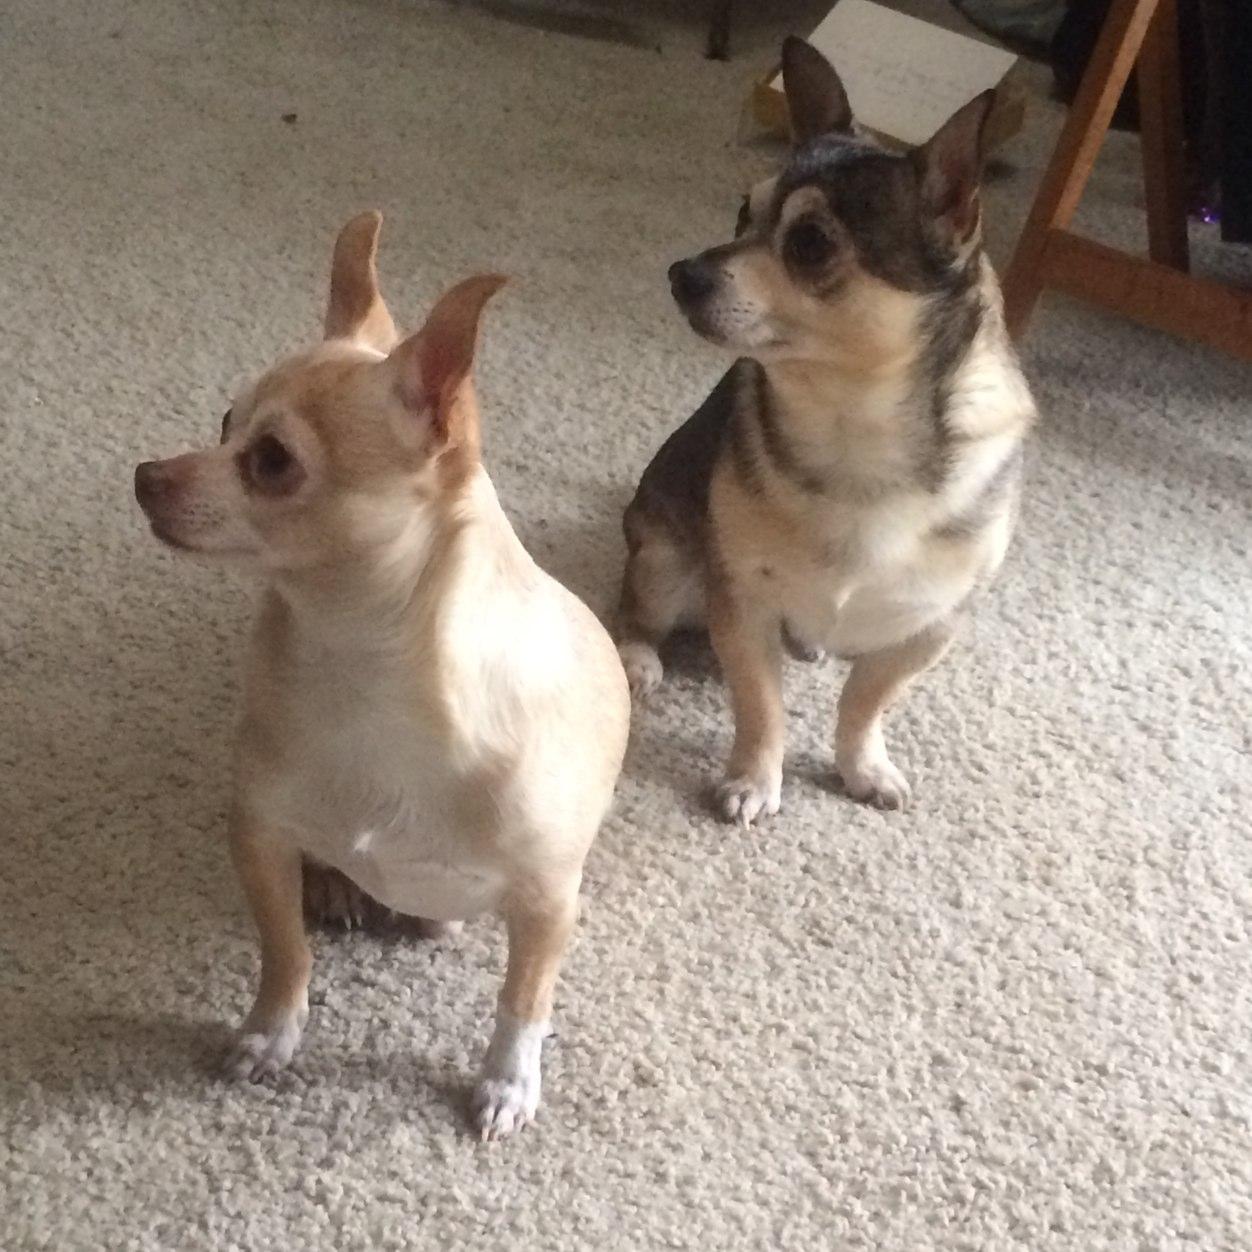 We're Paco and Pedro. The cutest little Chihuahua brothers you'll ever meet. We're besties and love Sprinkles cupcakes.